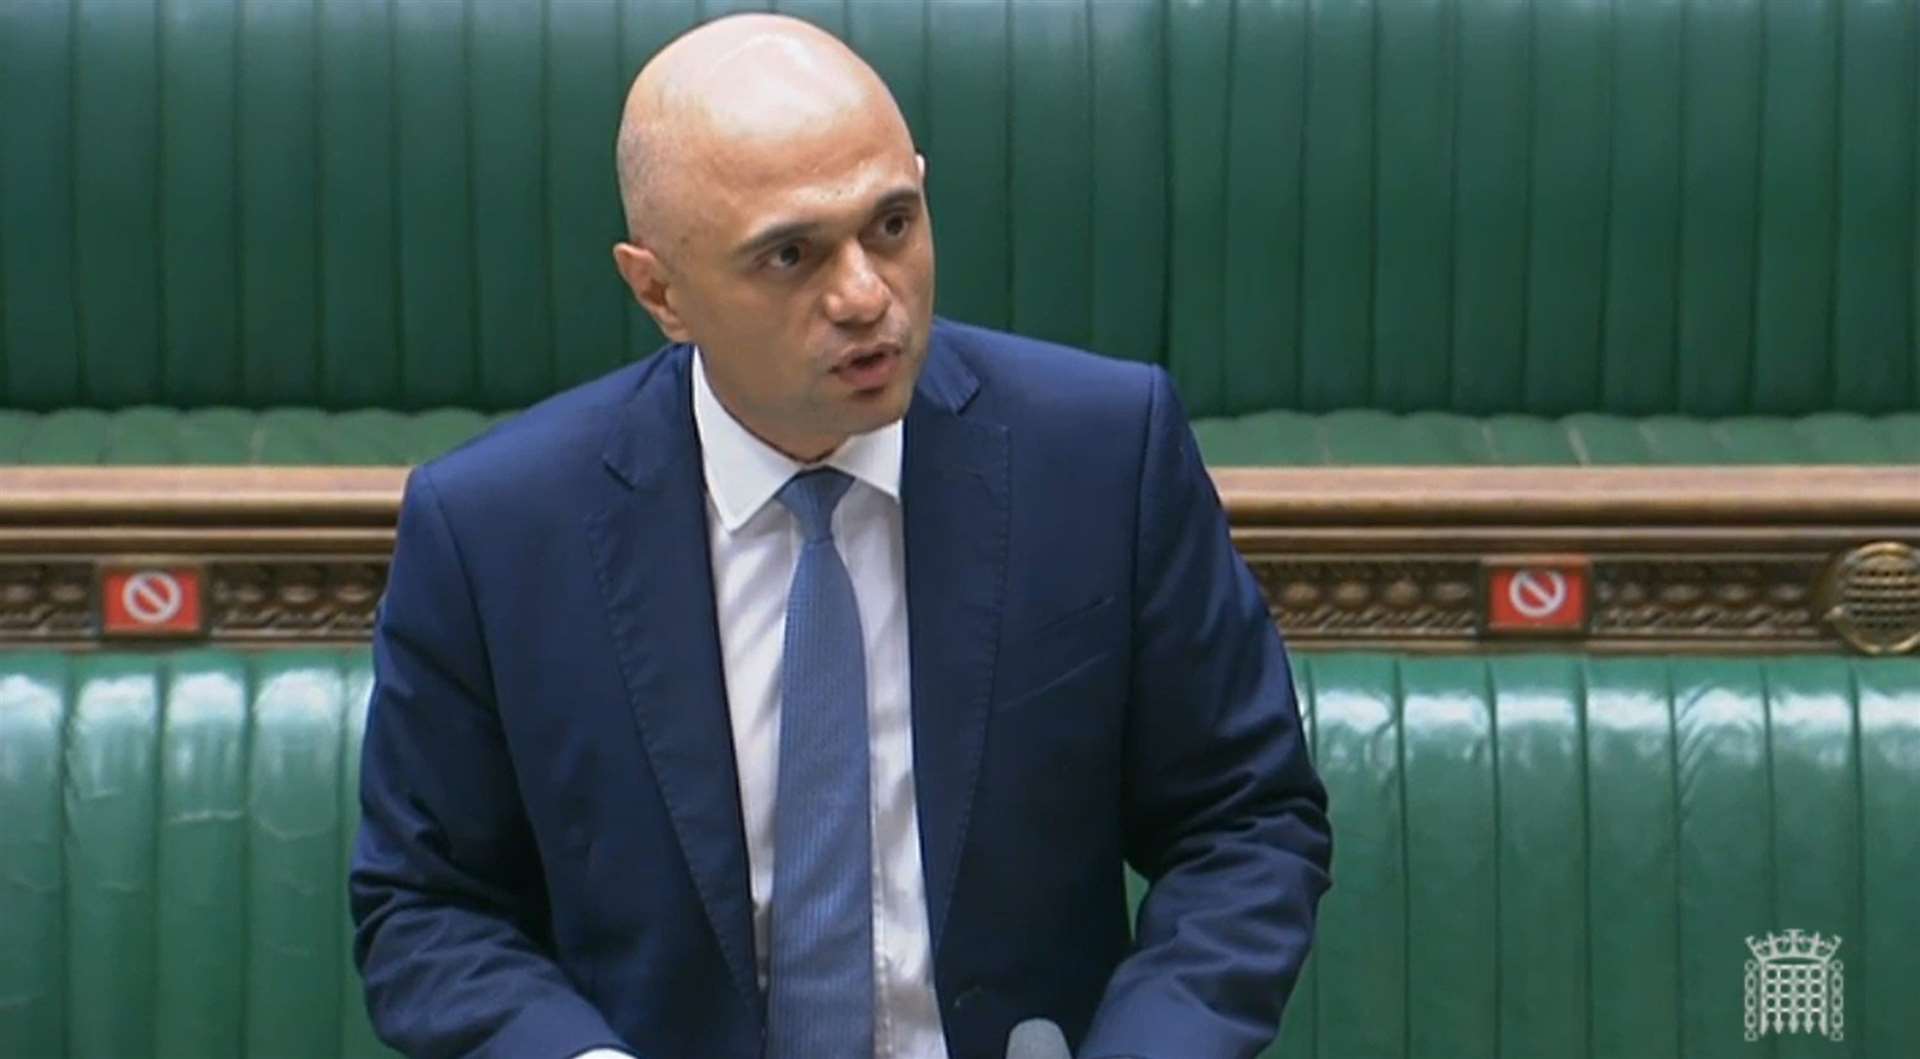 Health secretary Sajid Javid says a rise in cases is to be expected as restrictions fall away